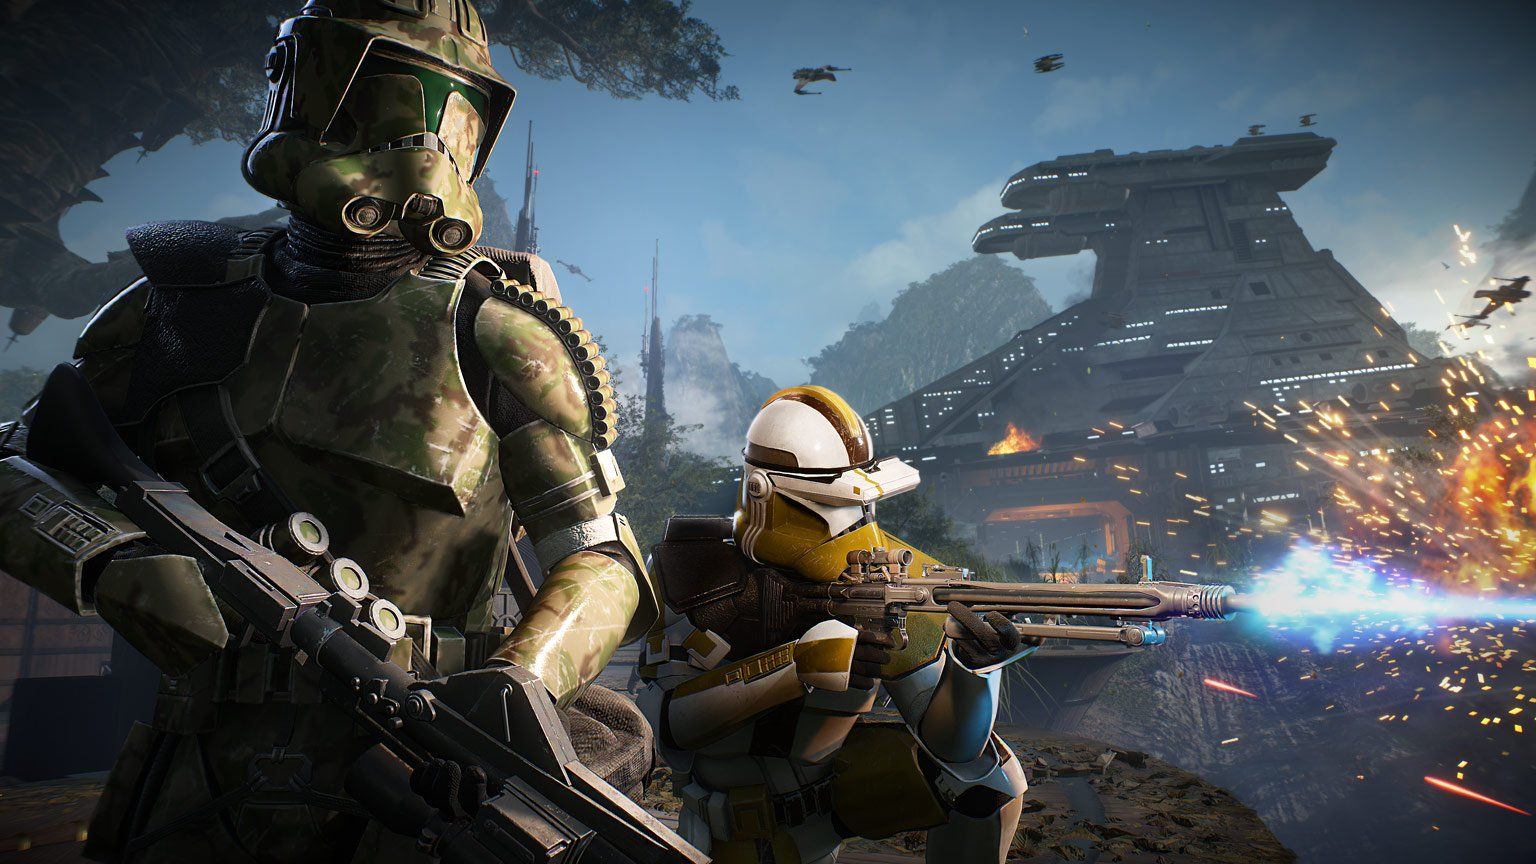 Star Wars Battlefront: Clone Troopers fighting in a massive battle